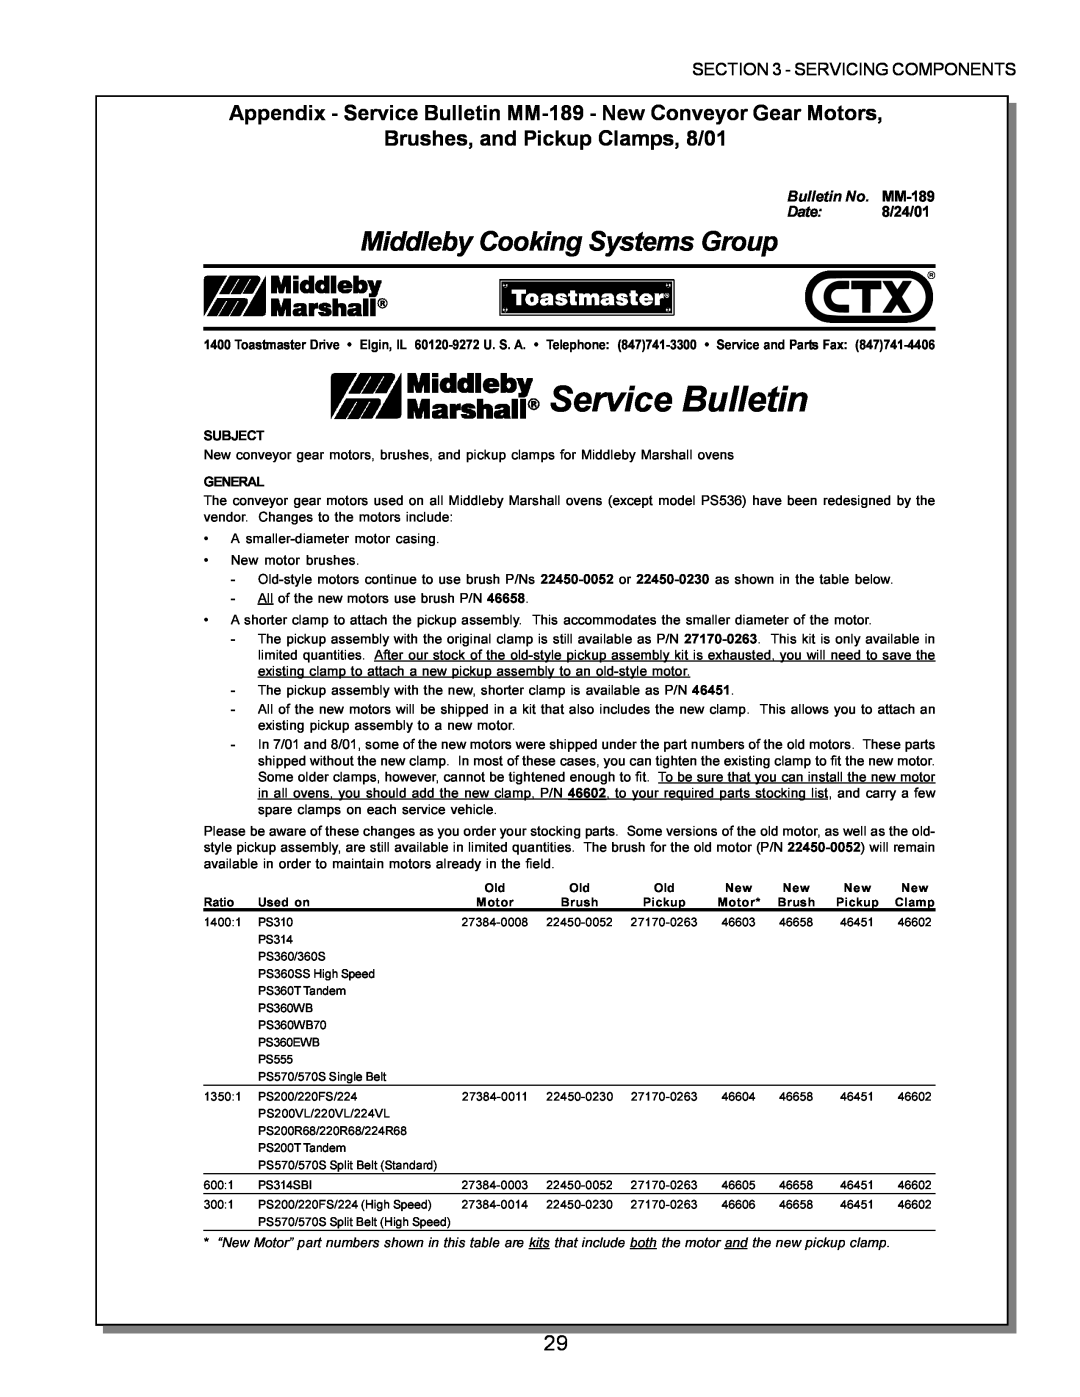 Middleby Marshall PS570 Appendix - Service Bulletin MM-189 - New Conveyor Gear Motors, Brushes, and Pickup Clamps, 8/01 